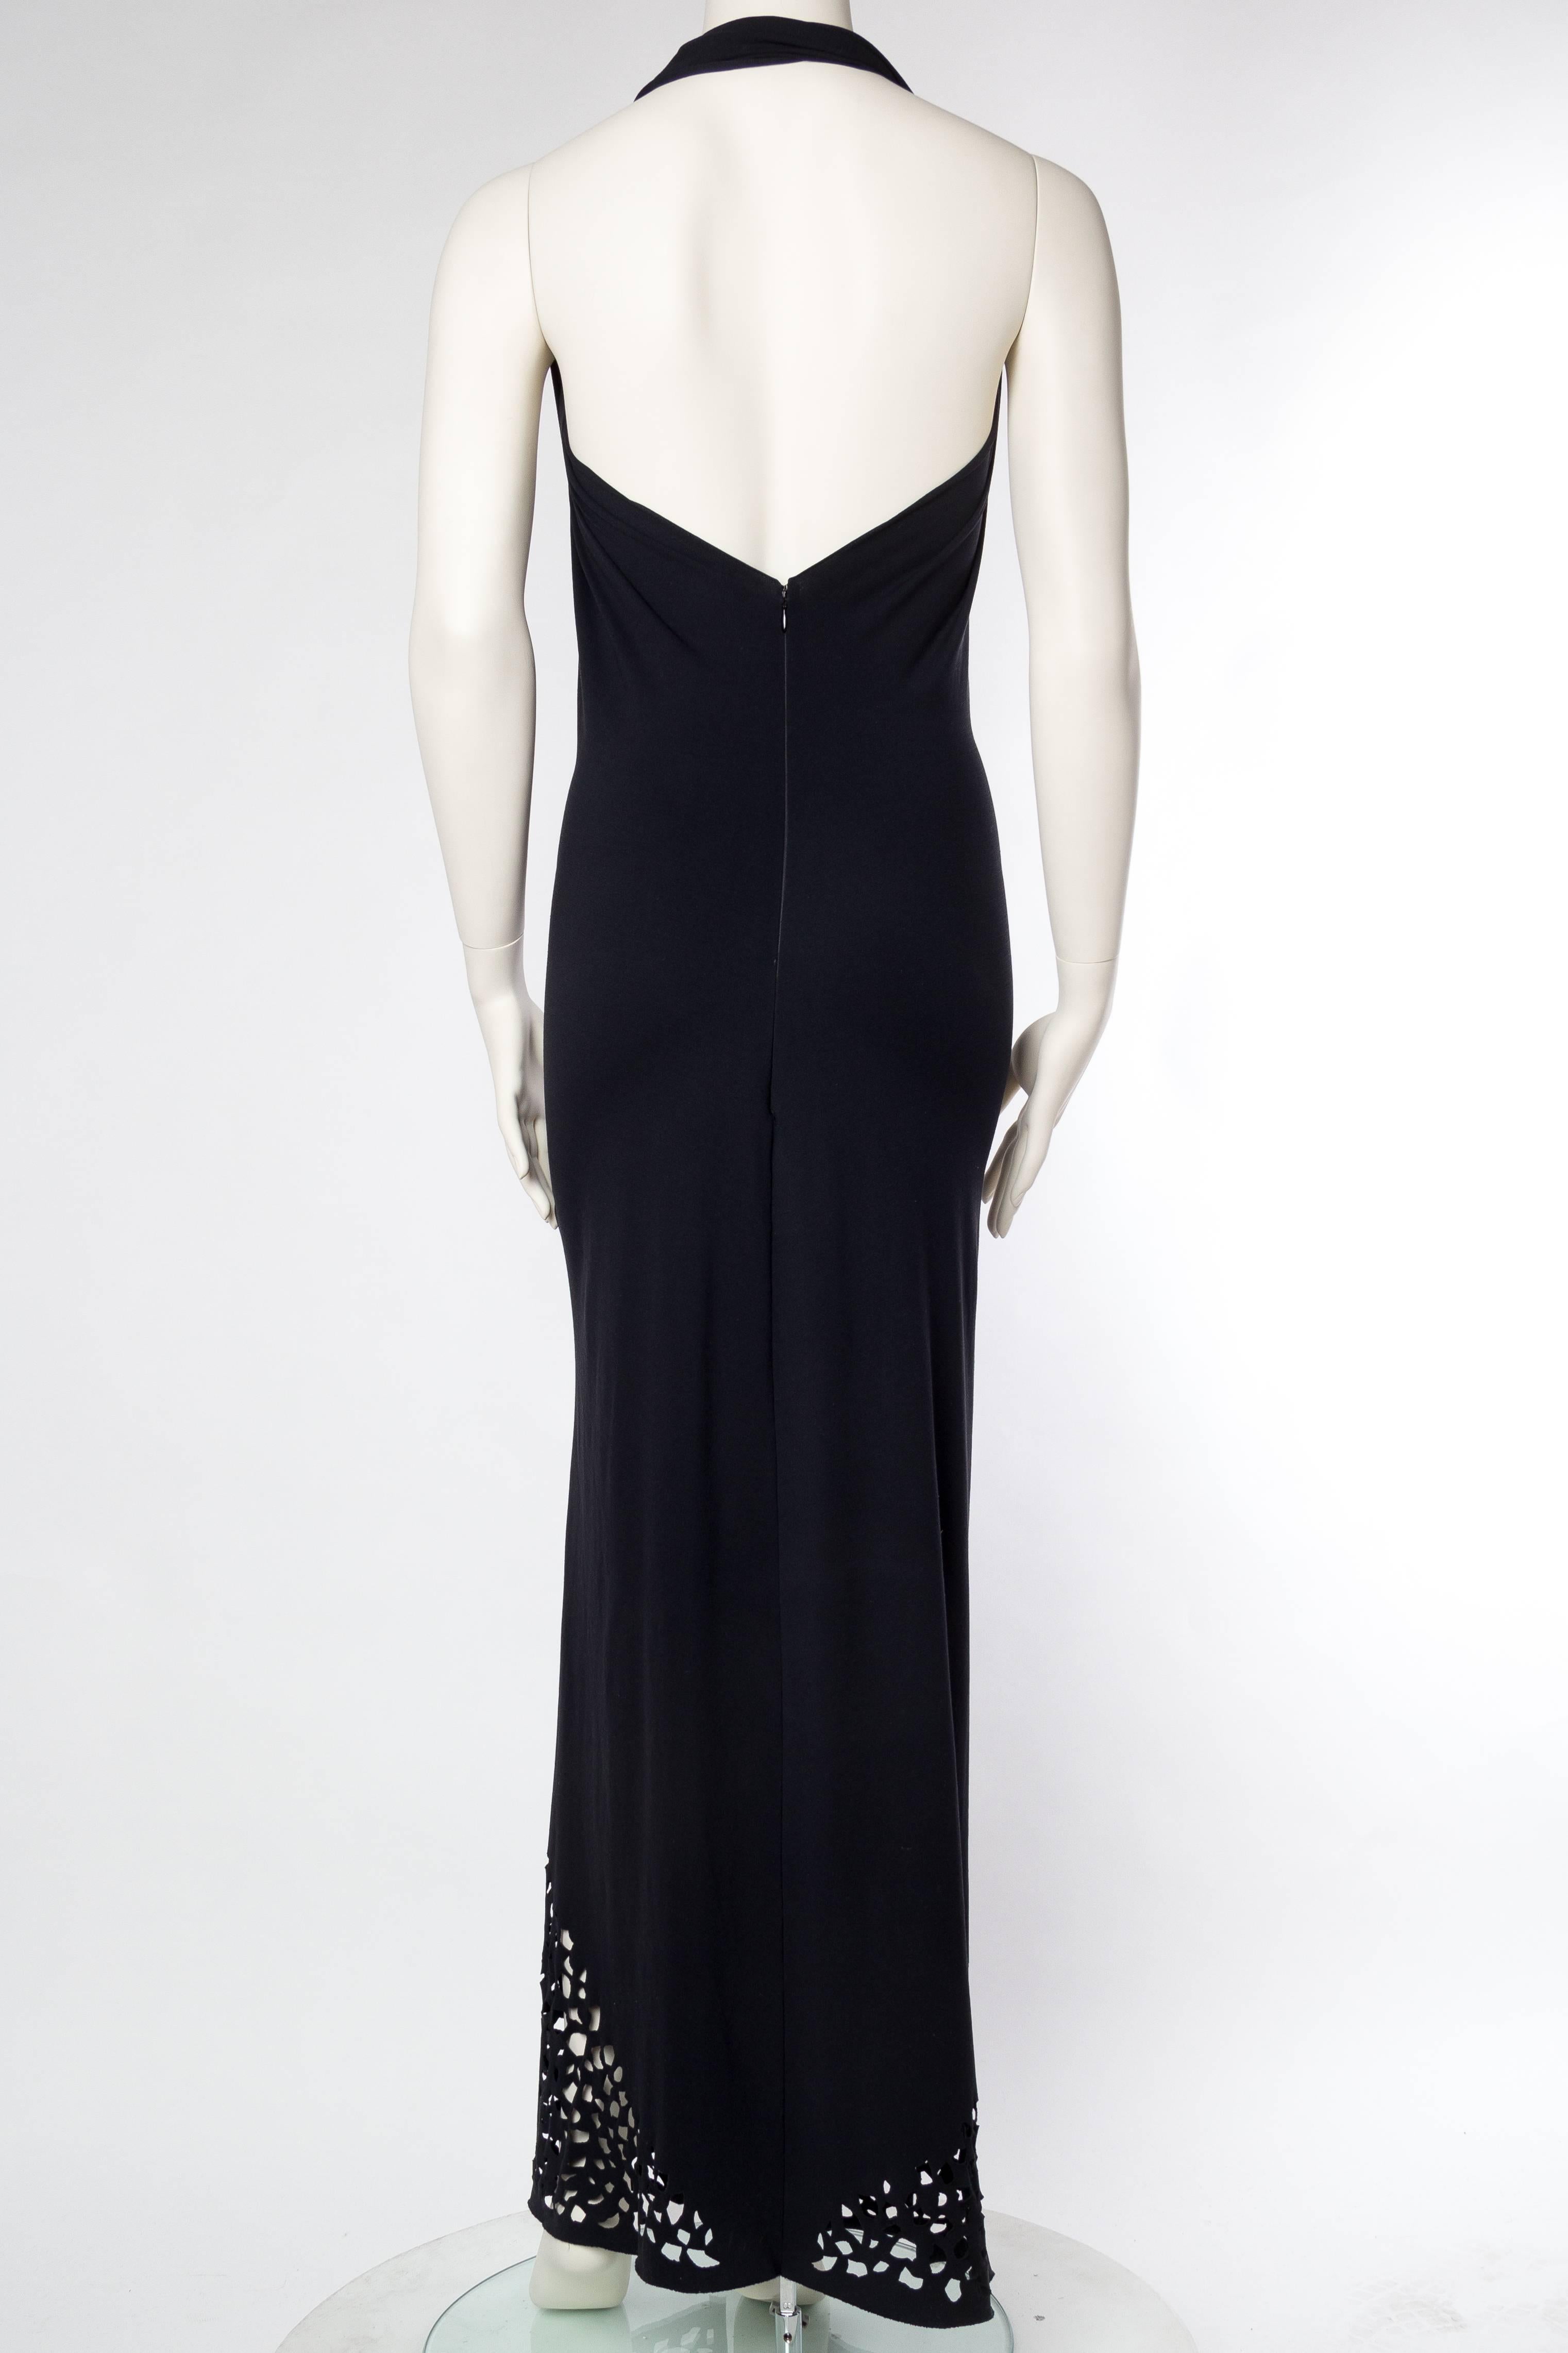 Women's Plunging Backless Slinky Jersey Gown By Karl Lagerfeld